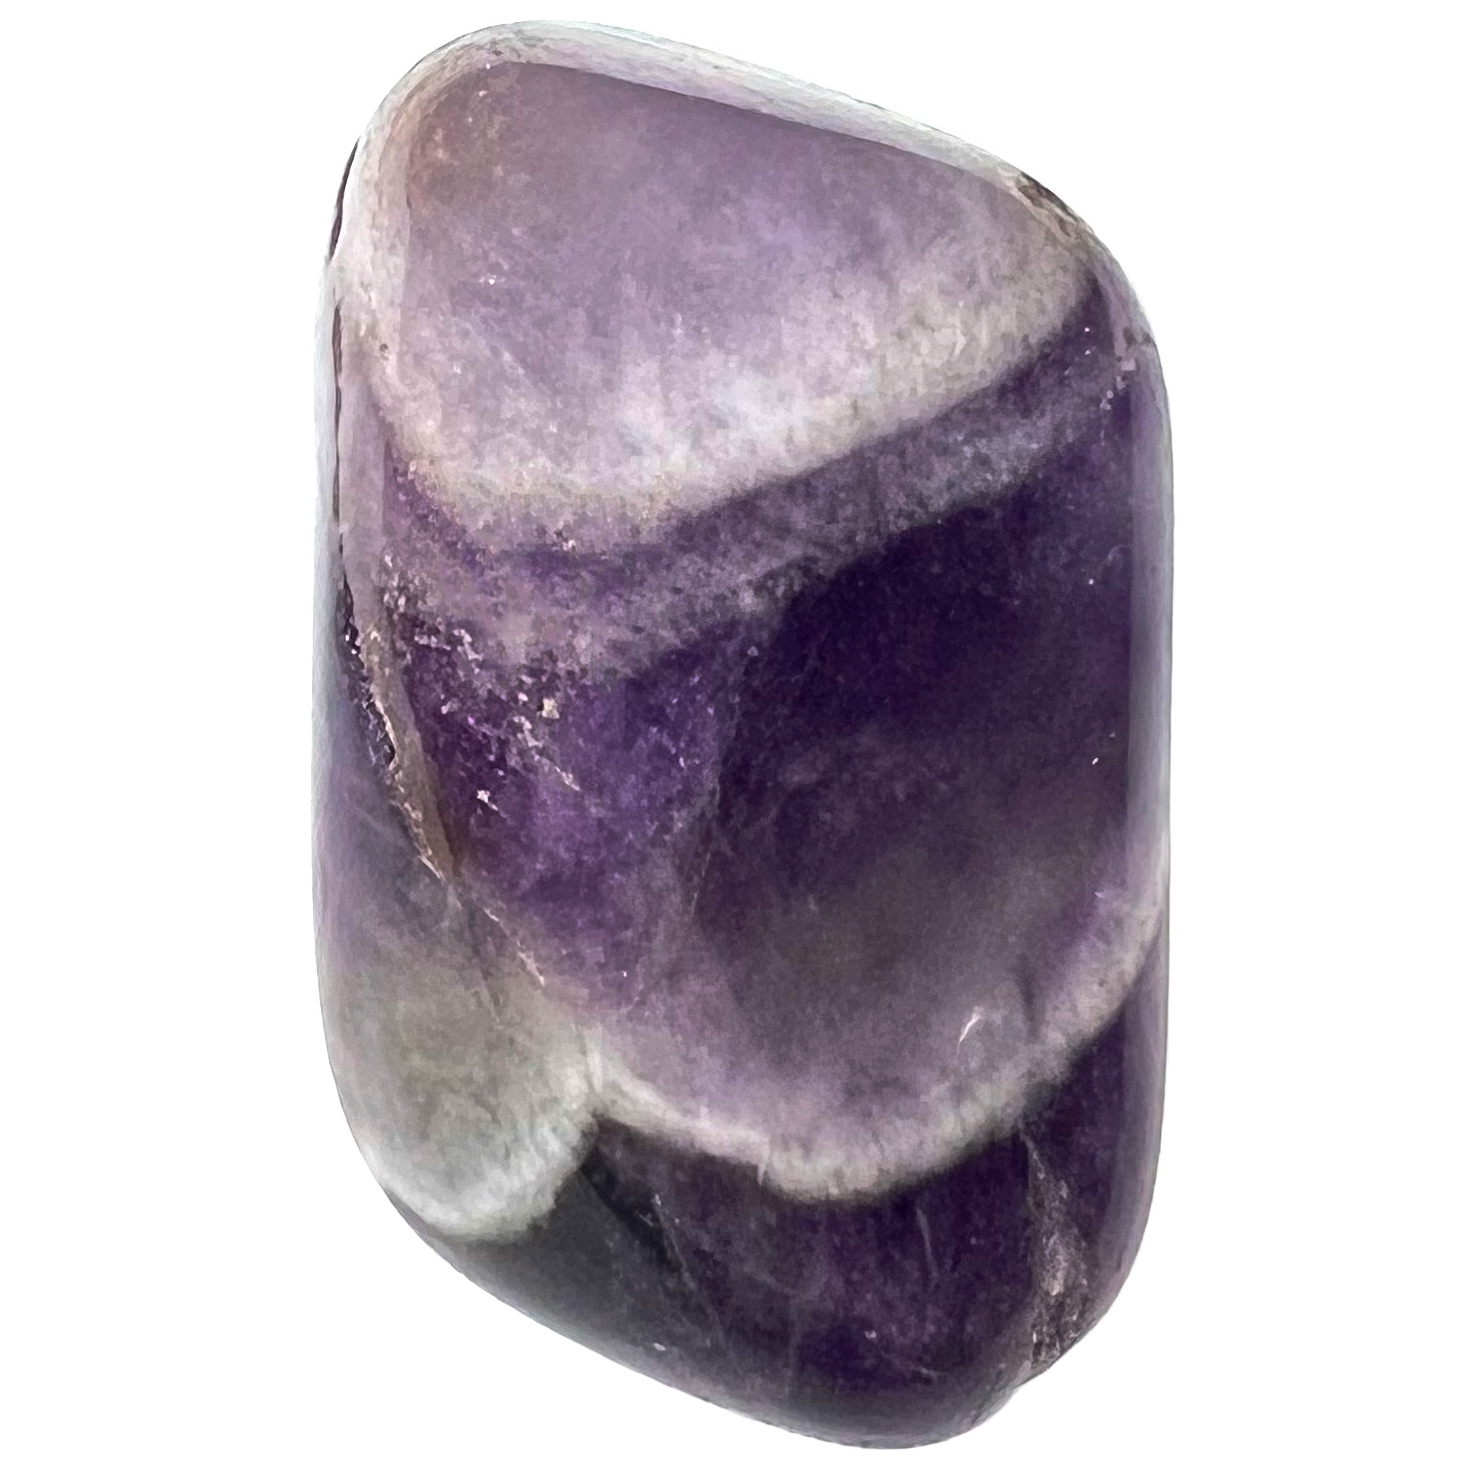 A tumbled banded amethyst stone.  The stone is dark purple with white banded stripes.